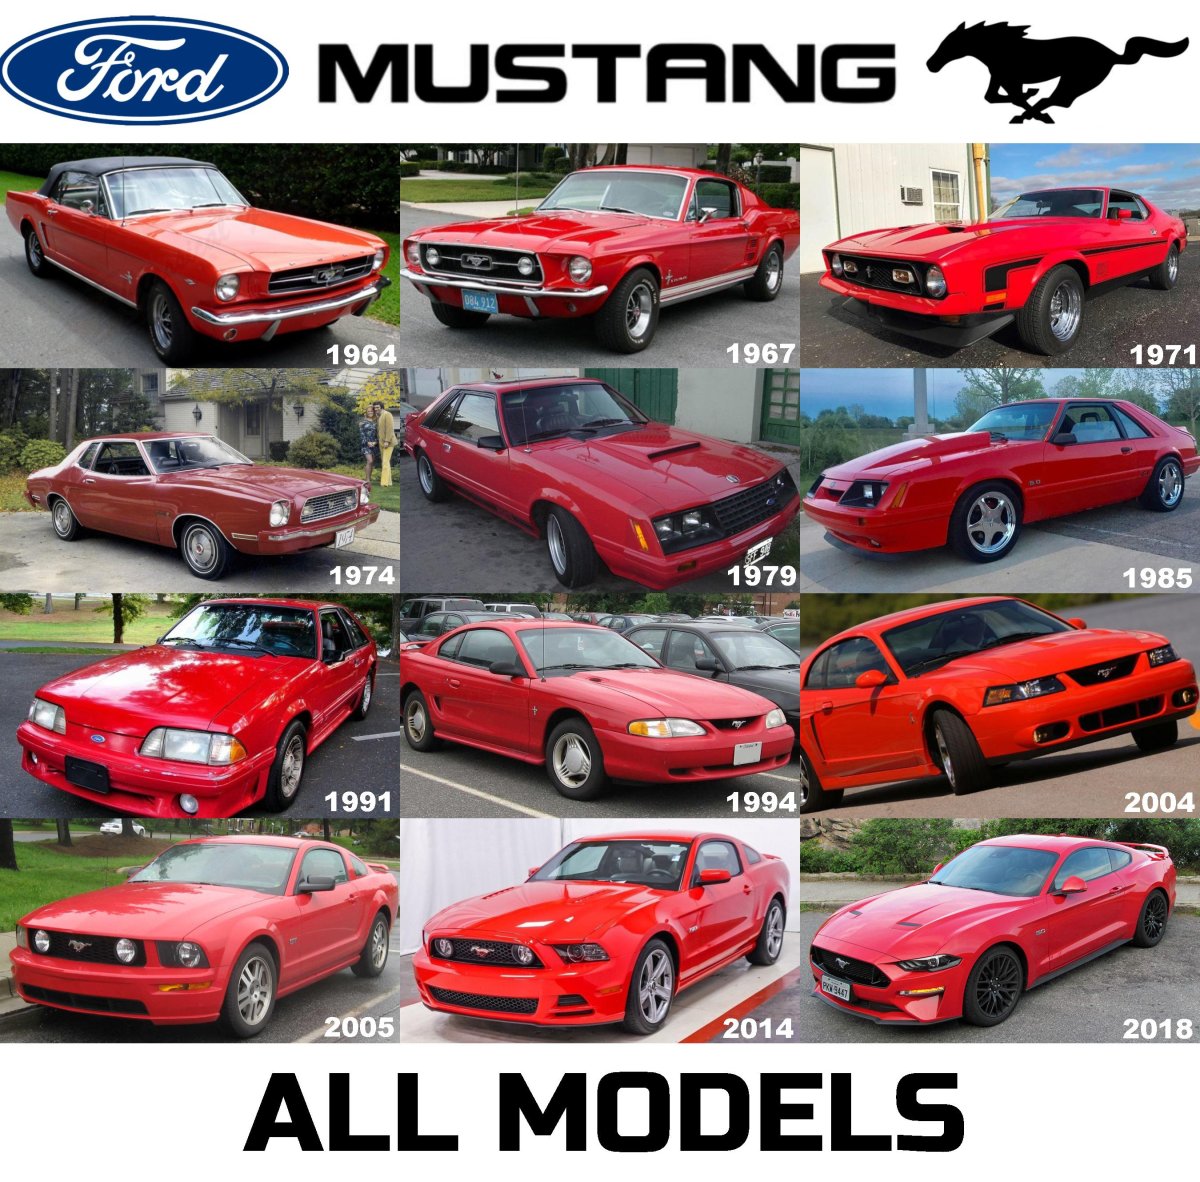 Ford Mustang all models